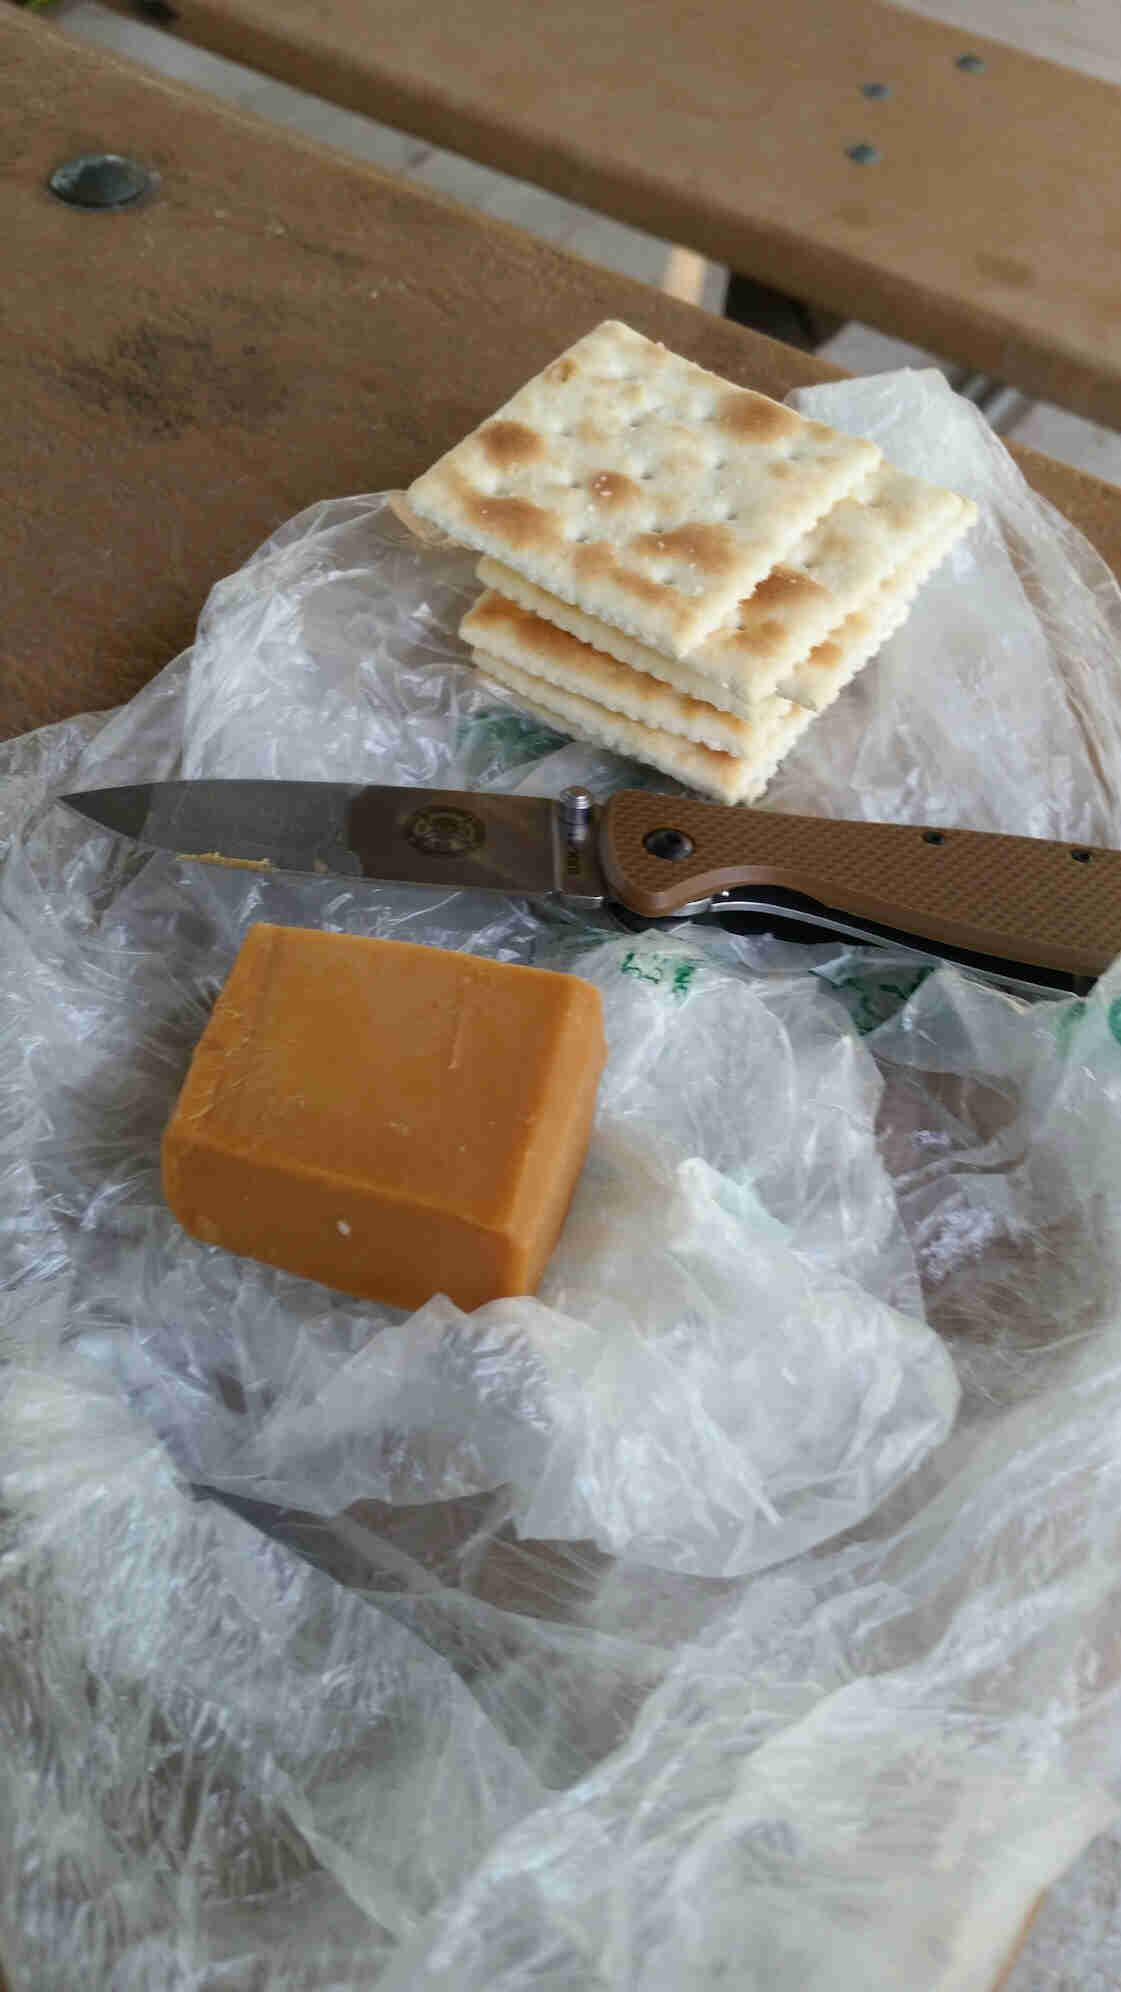 Downward view of crackers, a knife and block of cheese, on top of a clear plastic bag